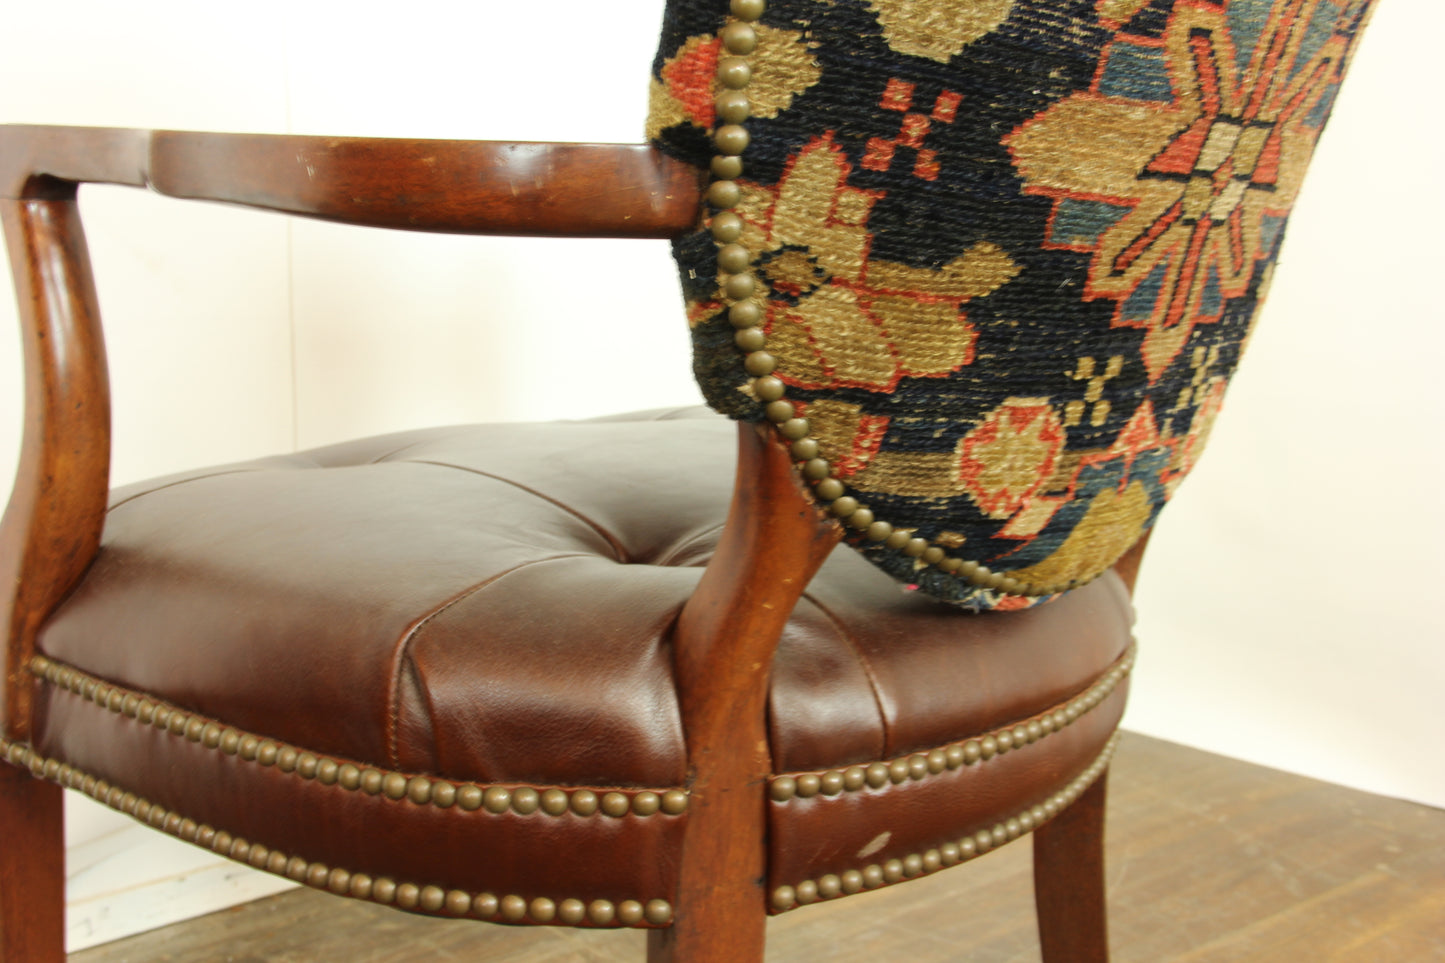 Kilim Rug and Leather Arm Chair